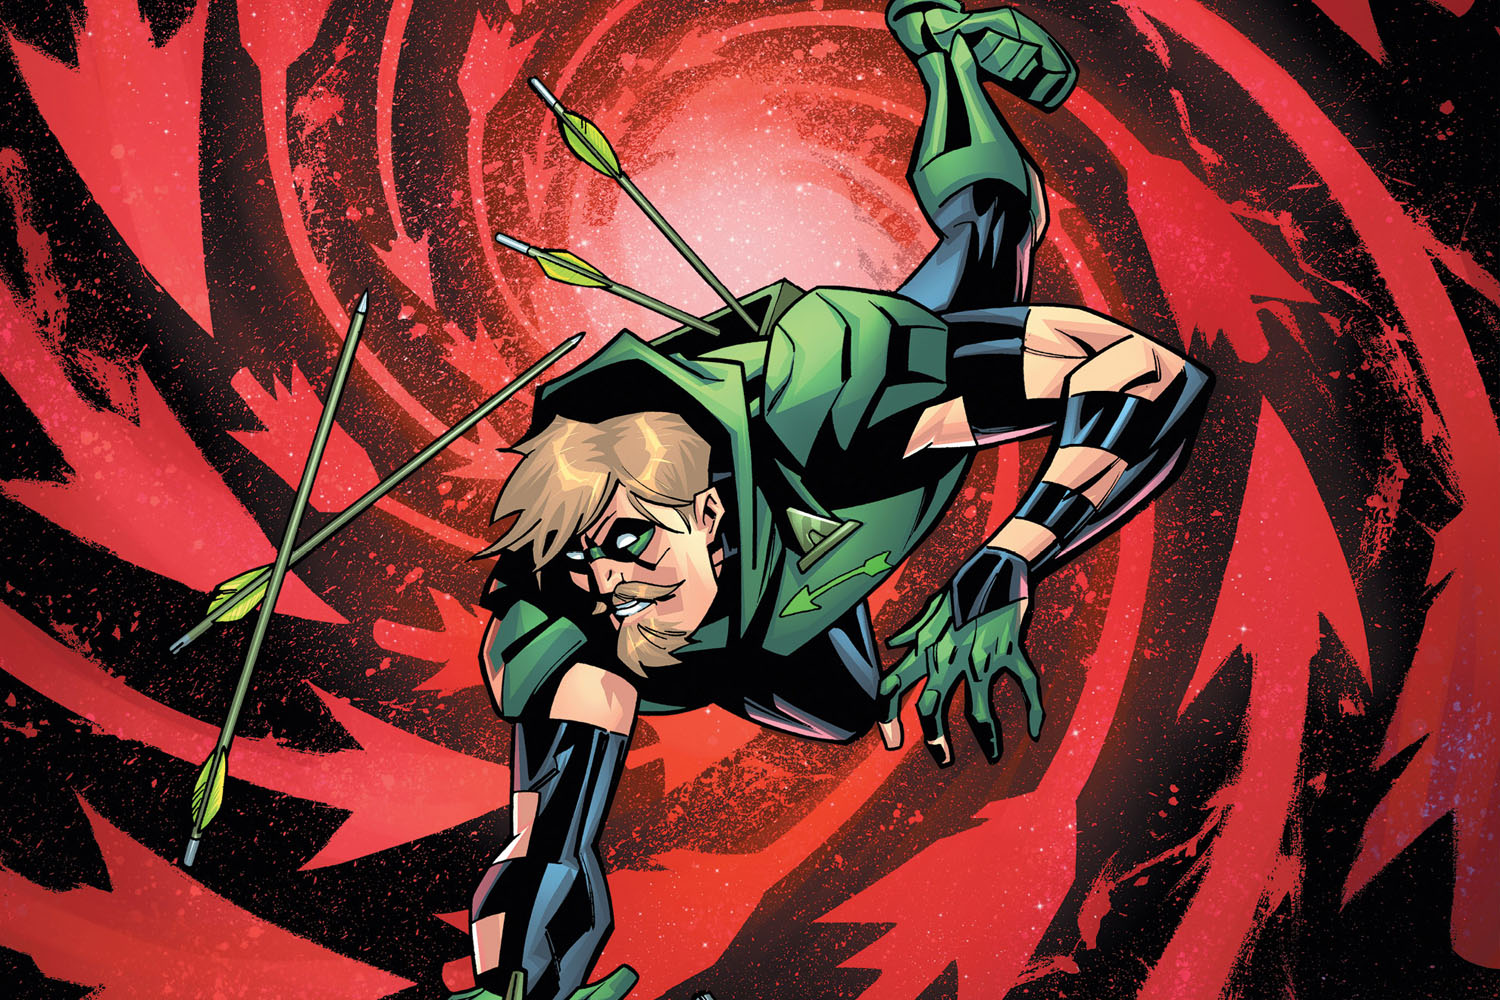 'Green Arrow' #6 is a new beginning for the character's future